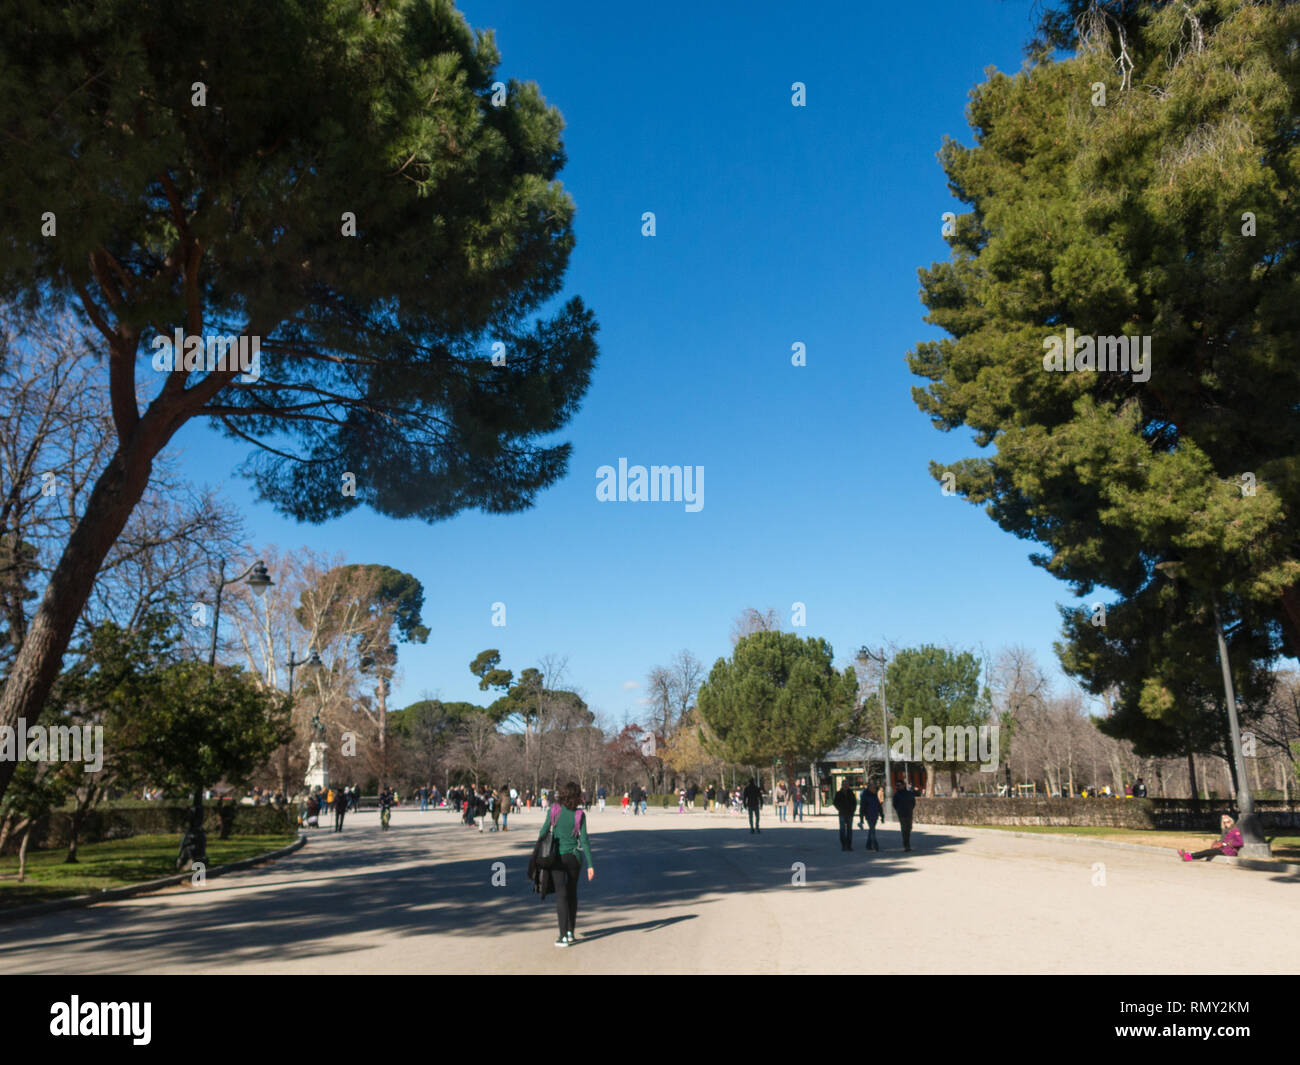 Madrid, Spain - January 27, 2018: Path inside the Retiro Park in Madrid. The Buen Retiro Park is a historic garden and public park, considered one of  Stock Photo